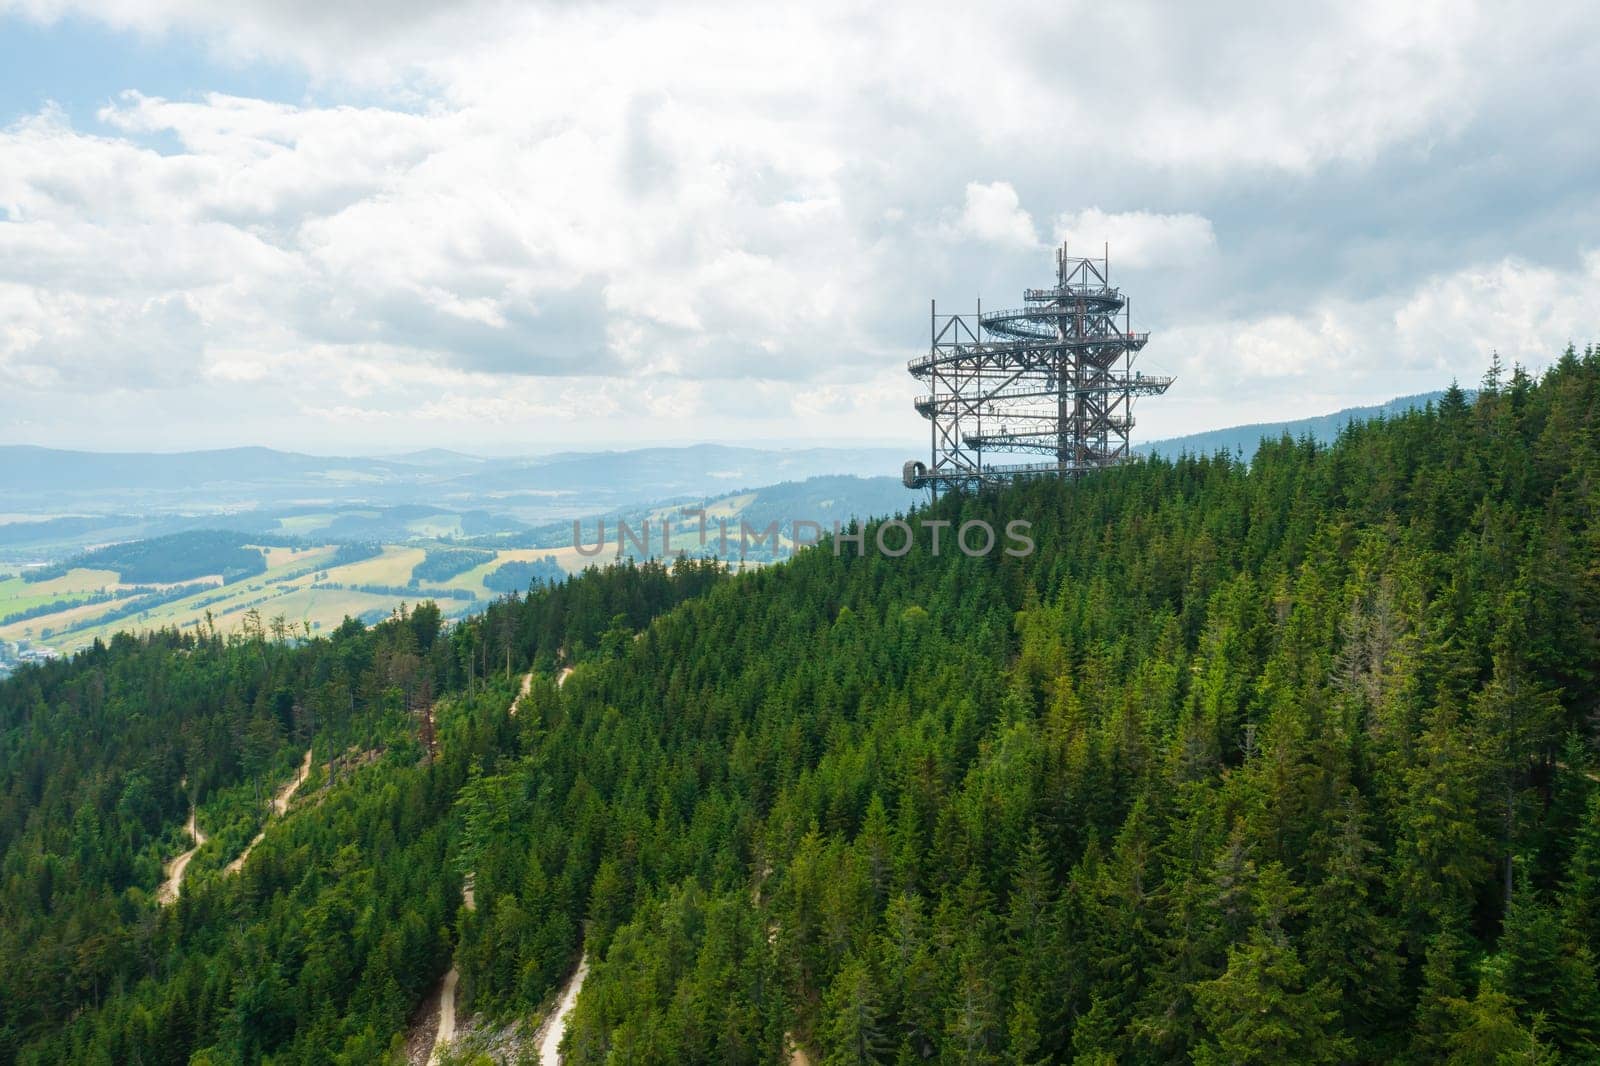 Sky walk observation tower in the forest between mountain hills near Sky Bridge 721 in a sunny summer day, Dolni Morava, Czech Republic.